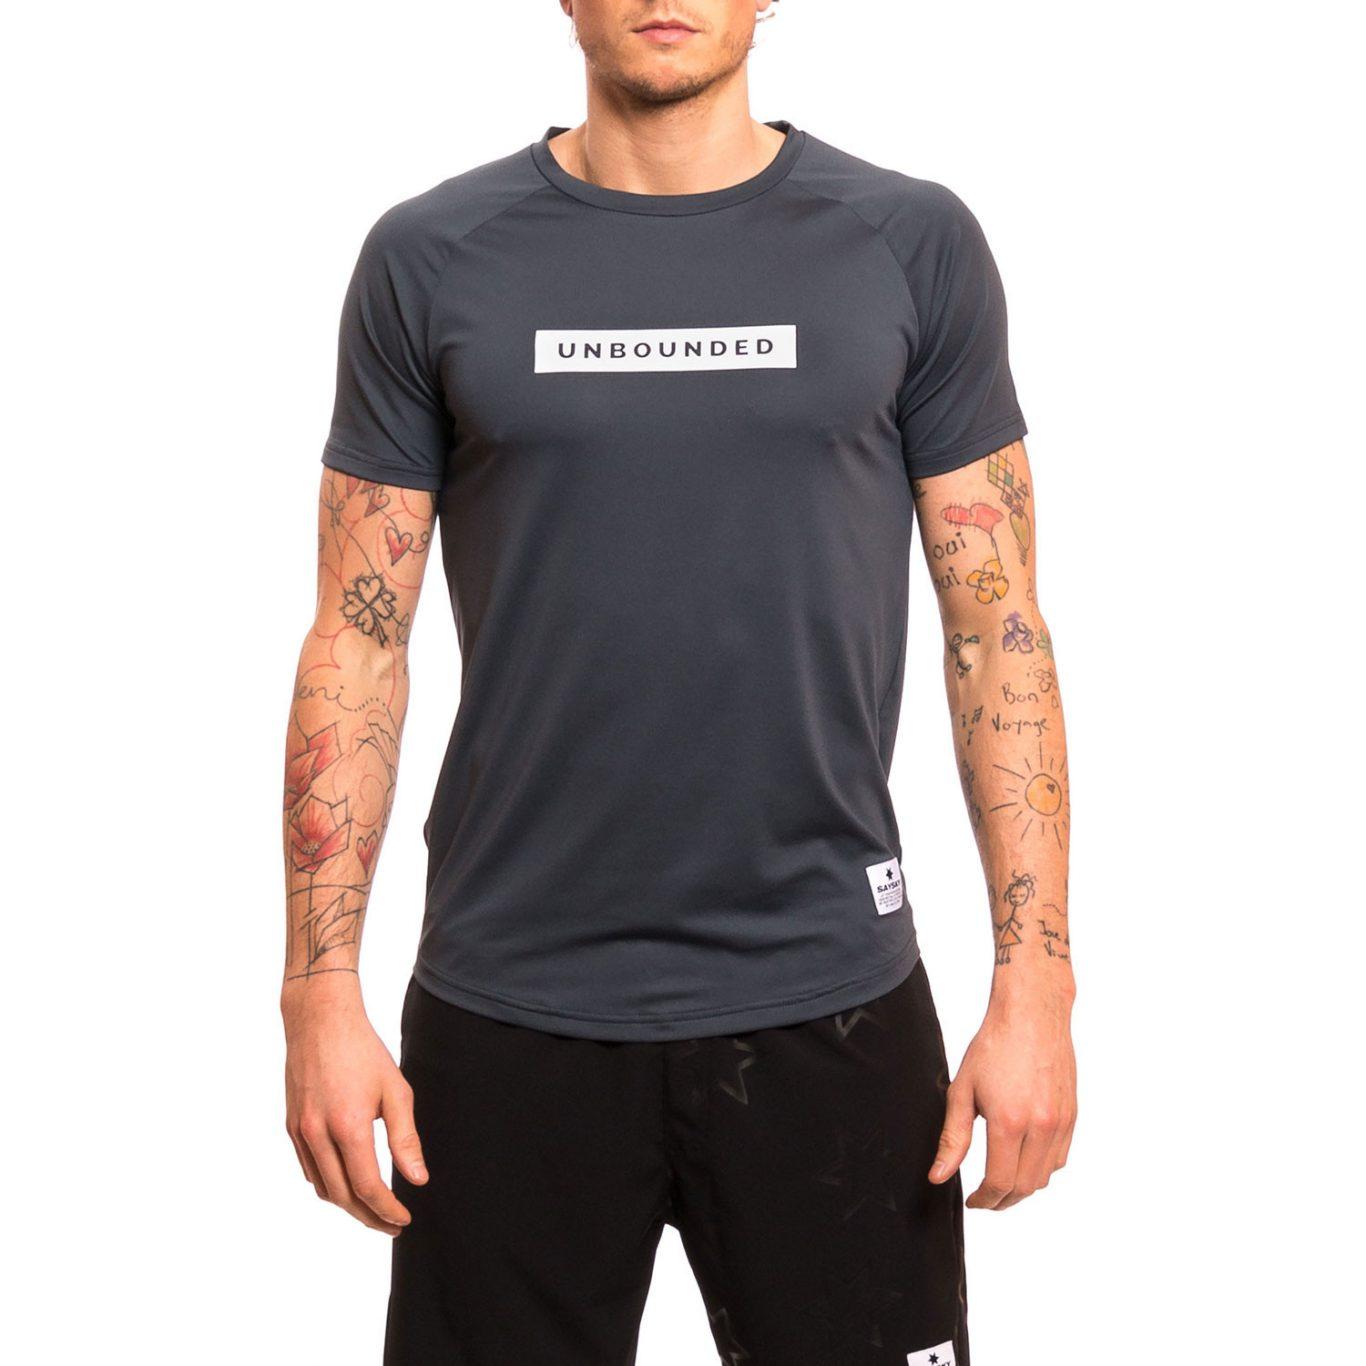 Unbounded SS Tee